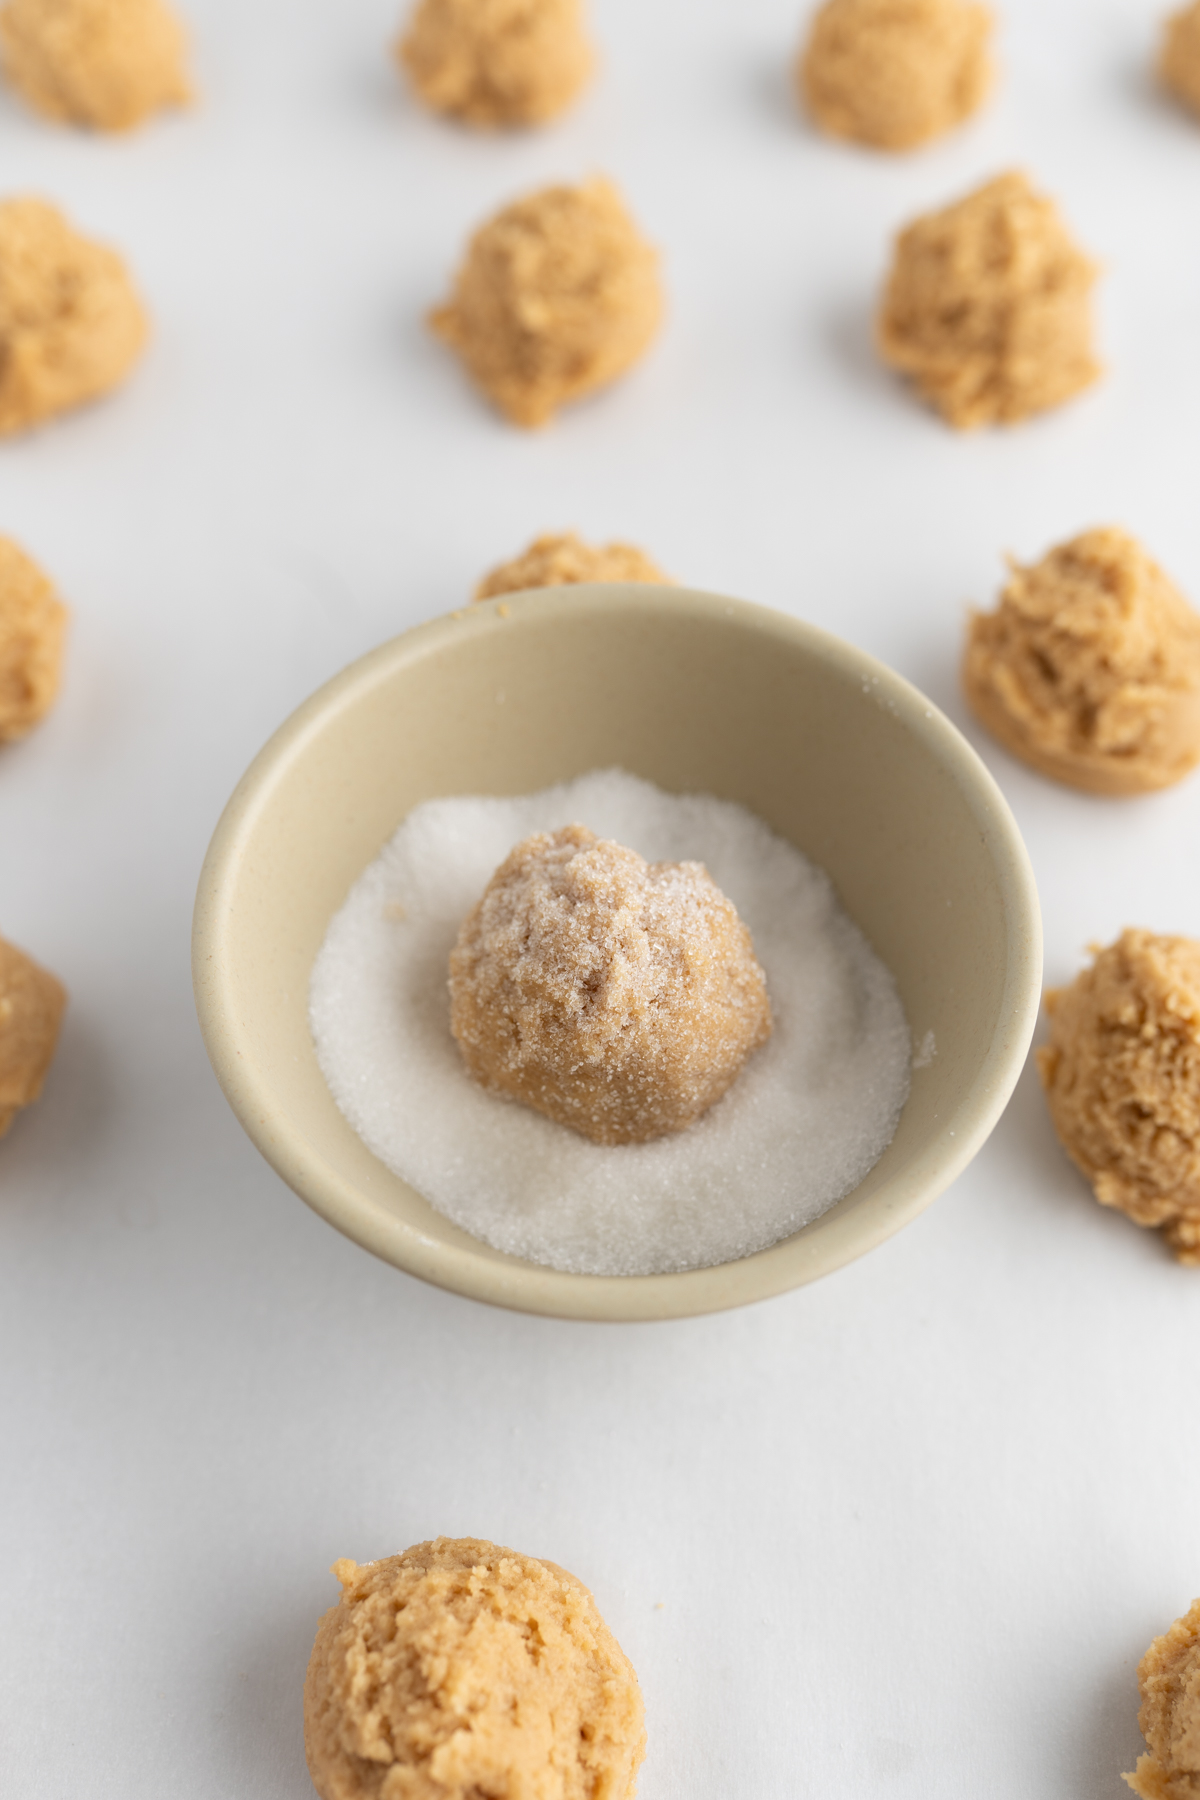 Recipe for peanut butter cookies - one dough ball in a bowl of sugar to roll and coat. 